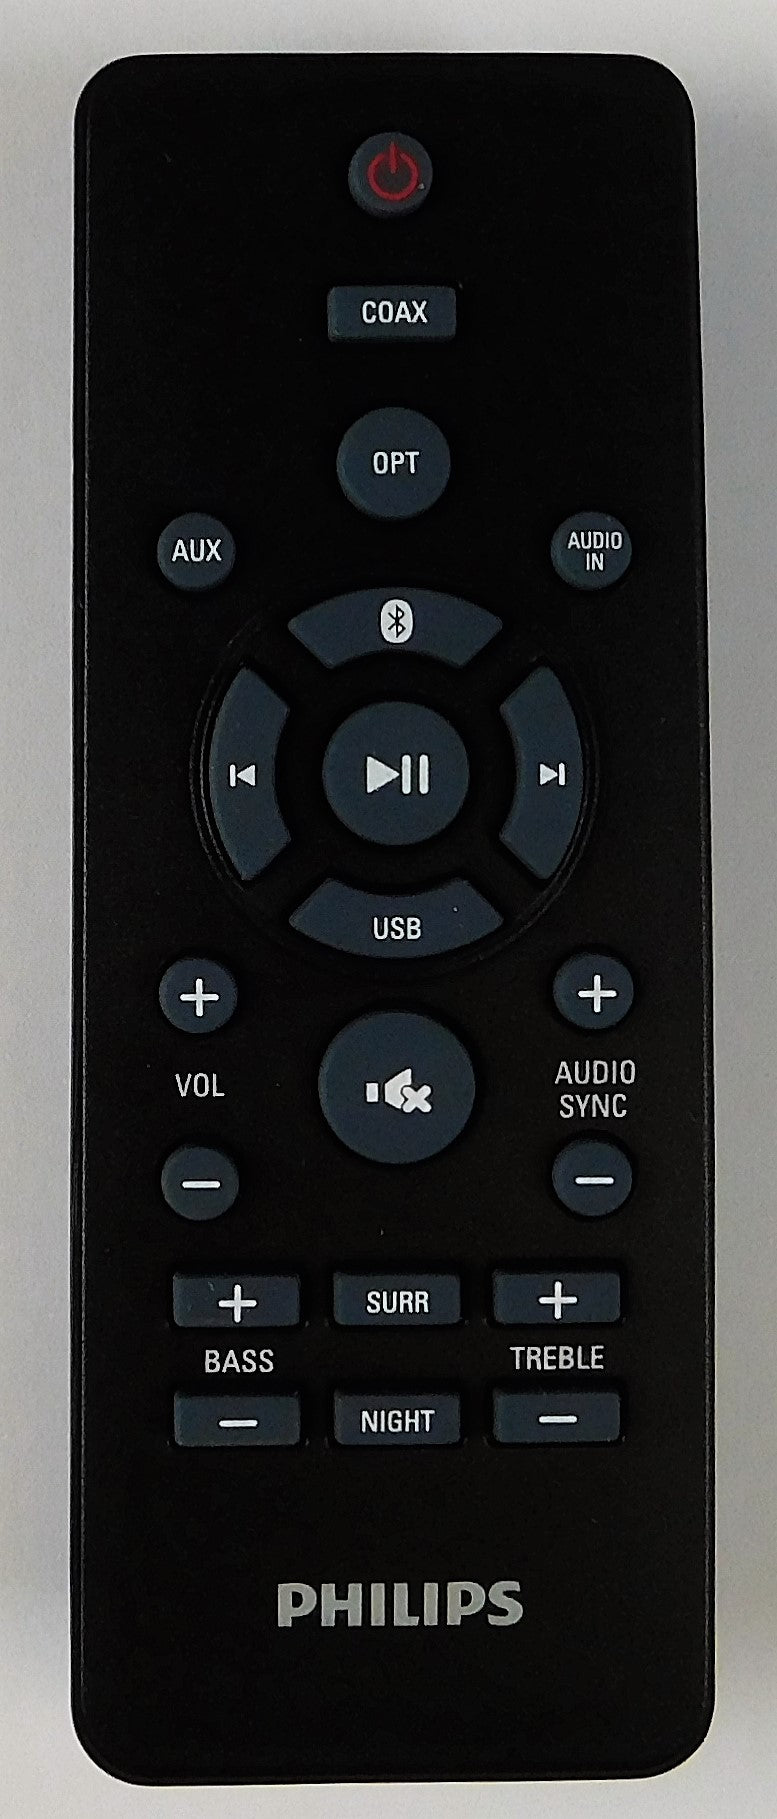 Original OEM replacement remote control for Philips Sound Bar 996580004176